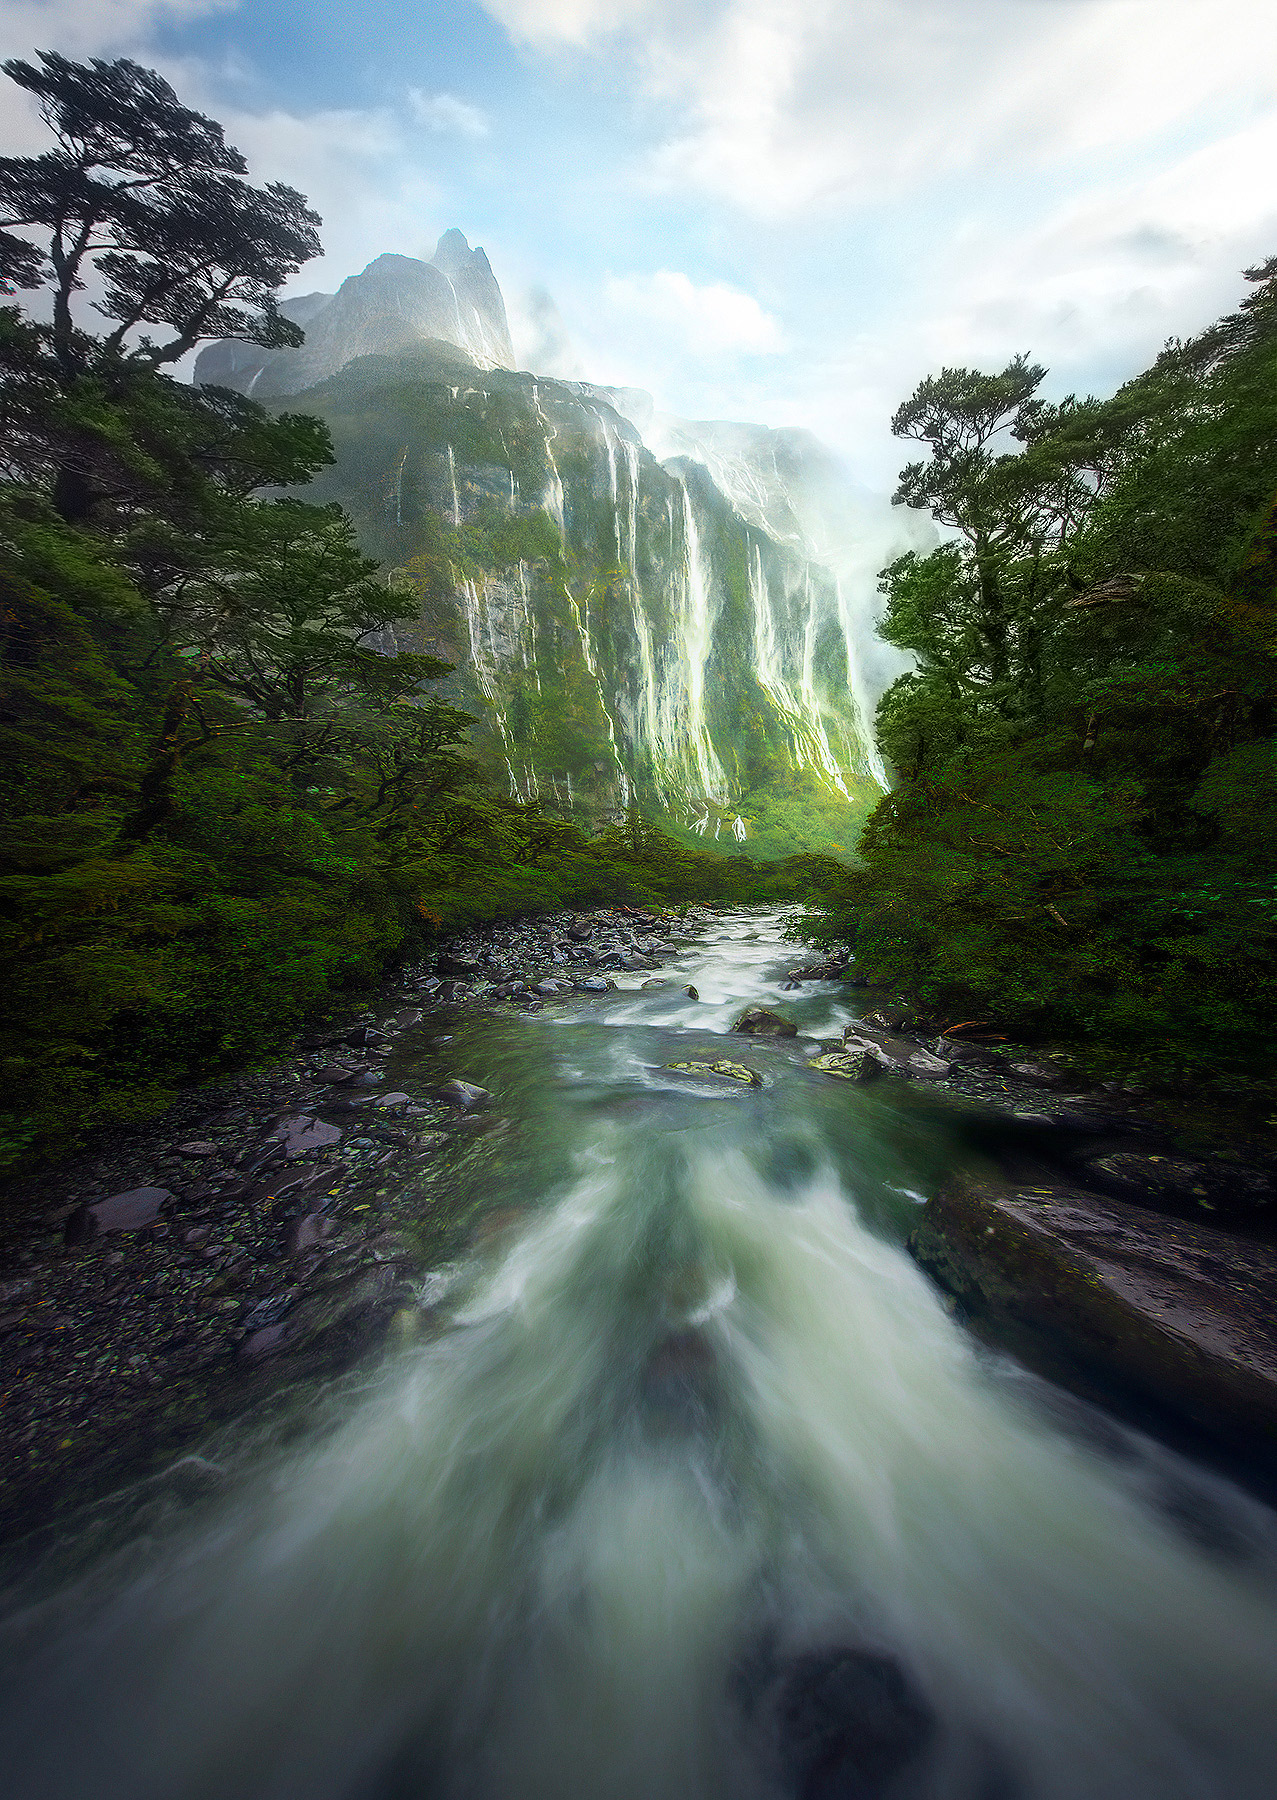 Thundering falls consume entire mountains after the rains in Fiordlands of New Zealand!